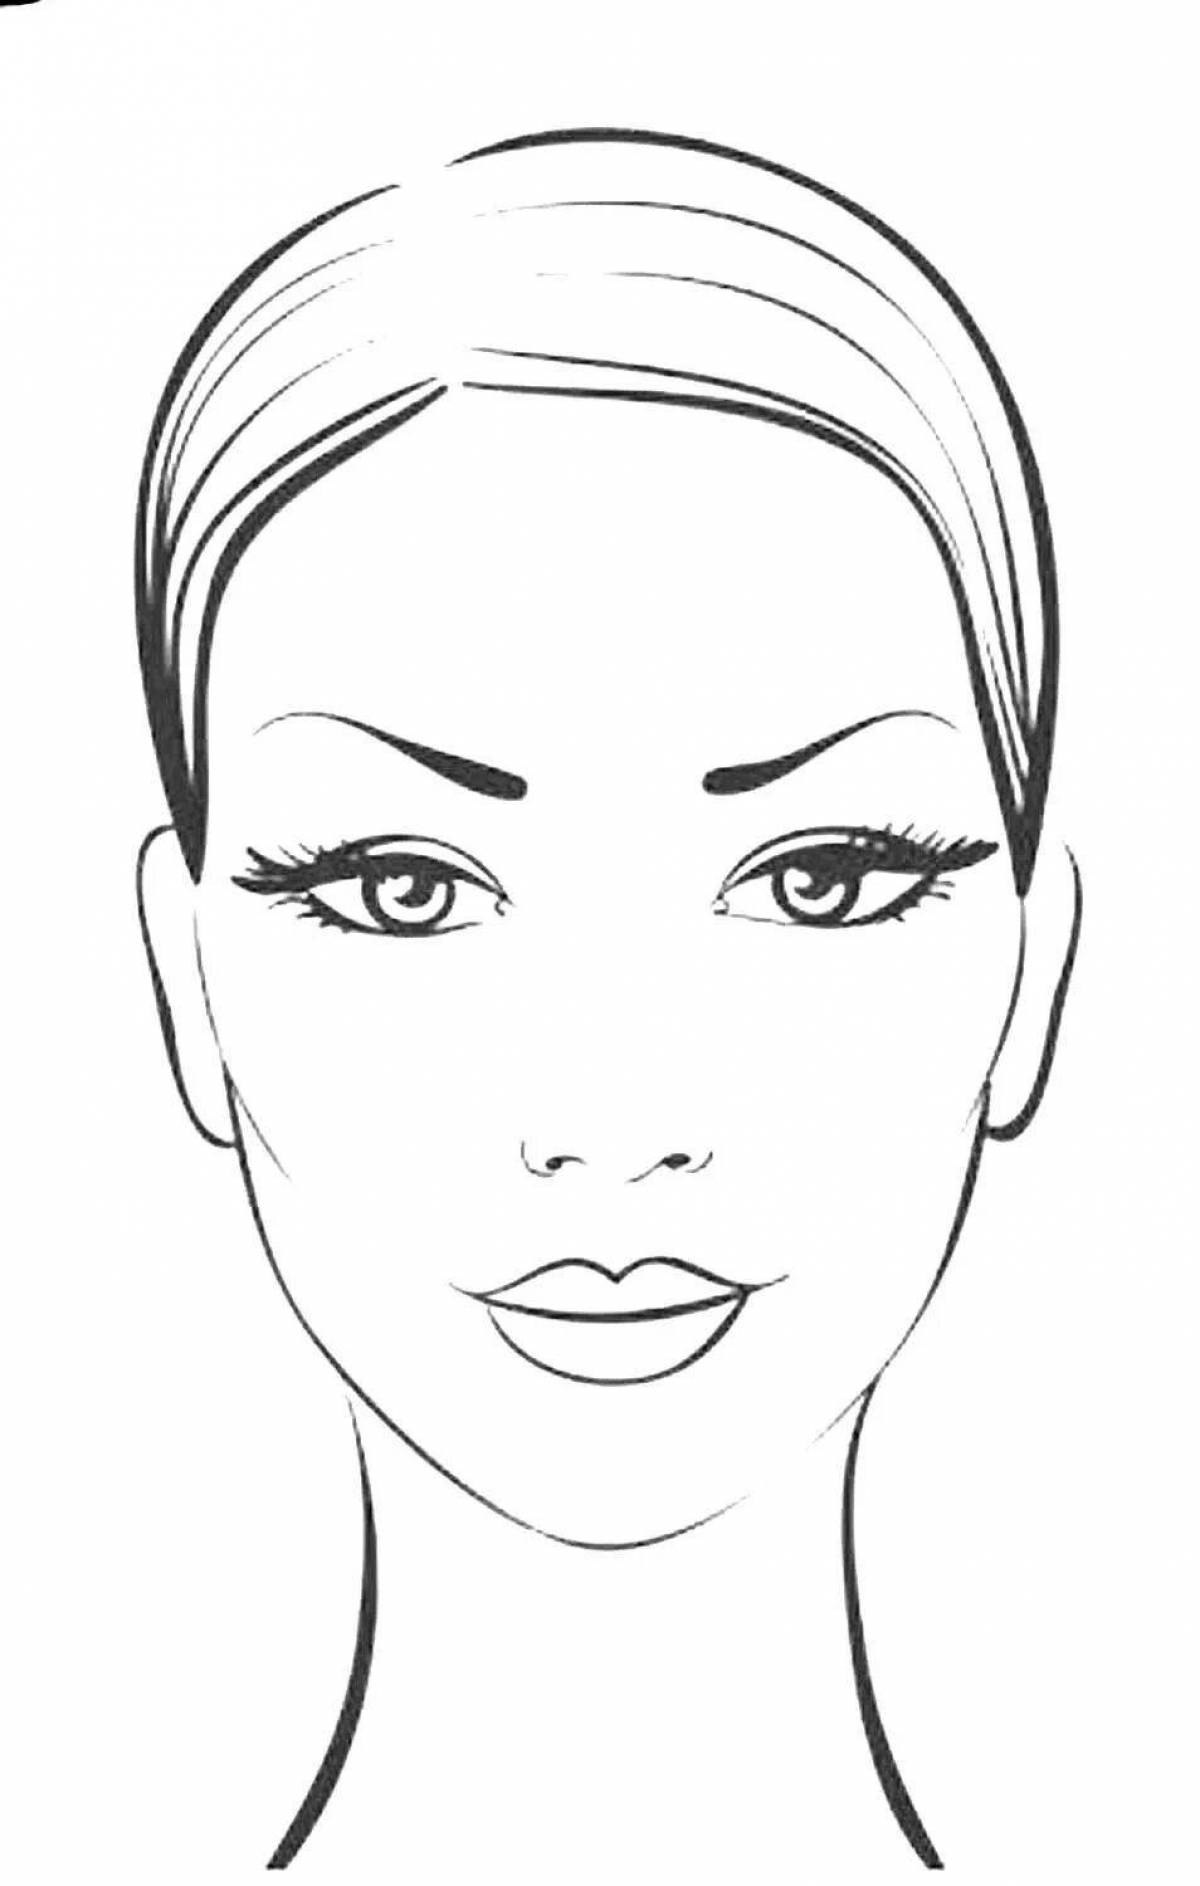 Coloring book shining makeup for girls